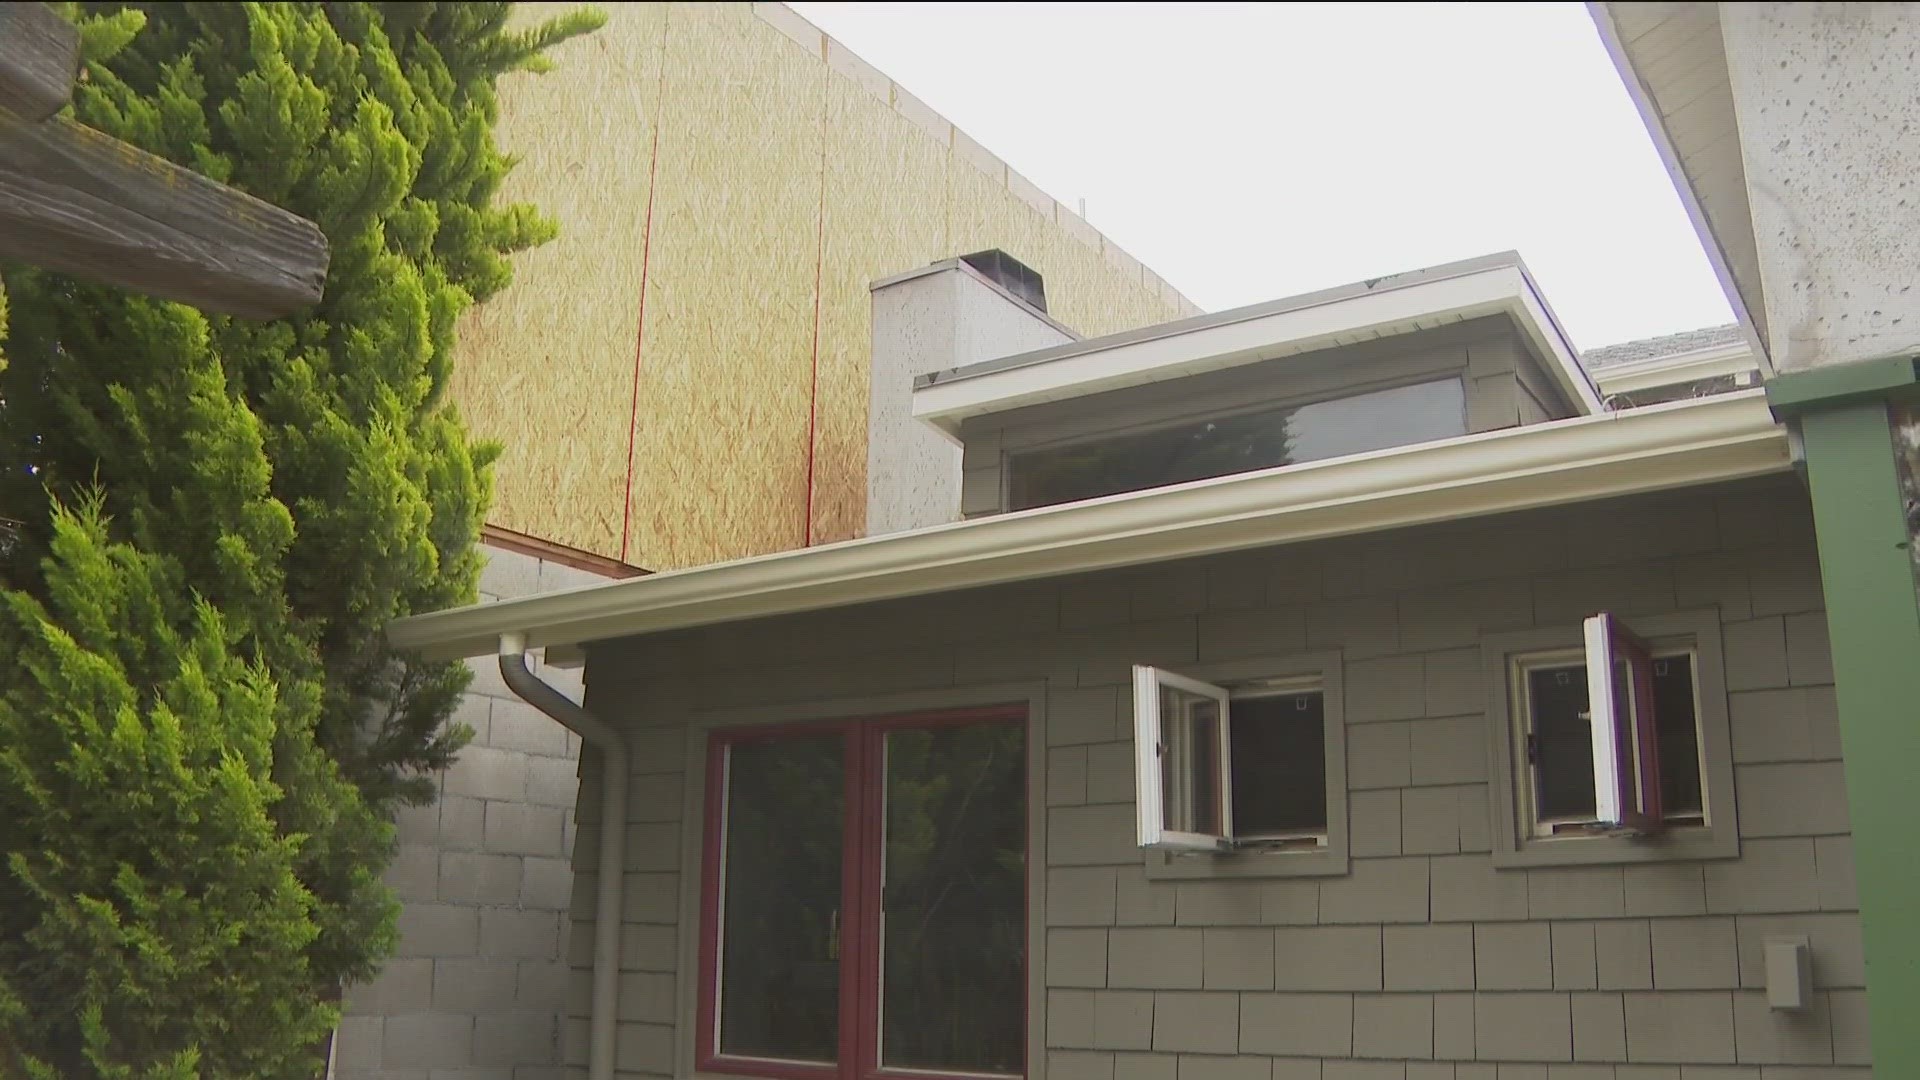 Two-story ADUs, or Accessory Dwelling Units, now have to have at least a four foot side yard setback.